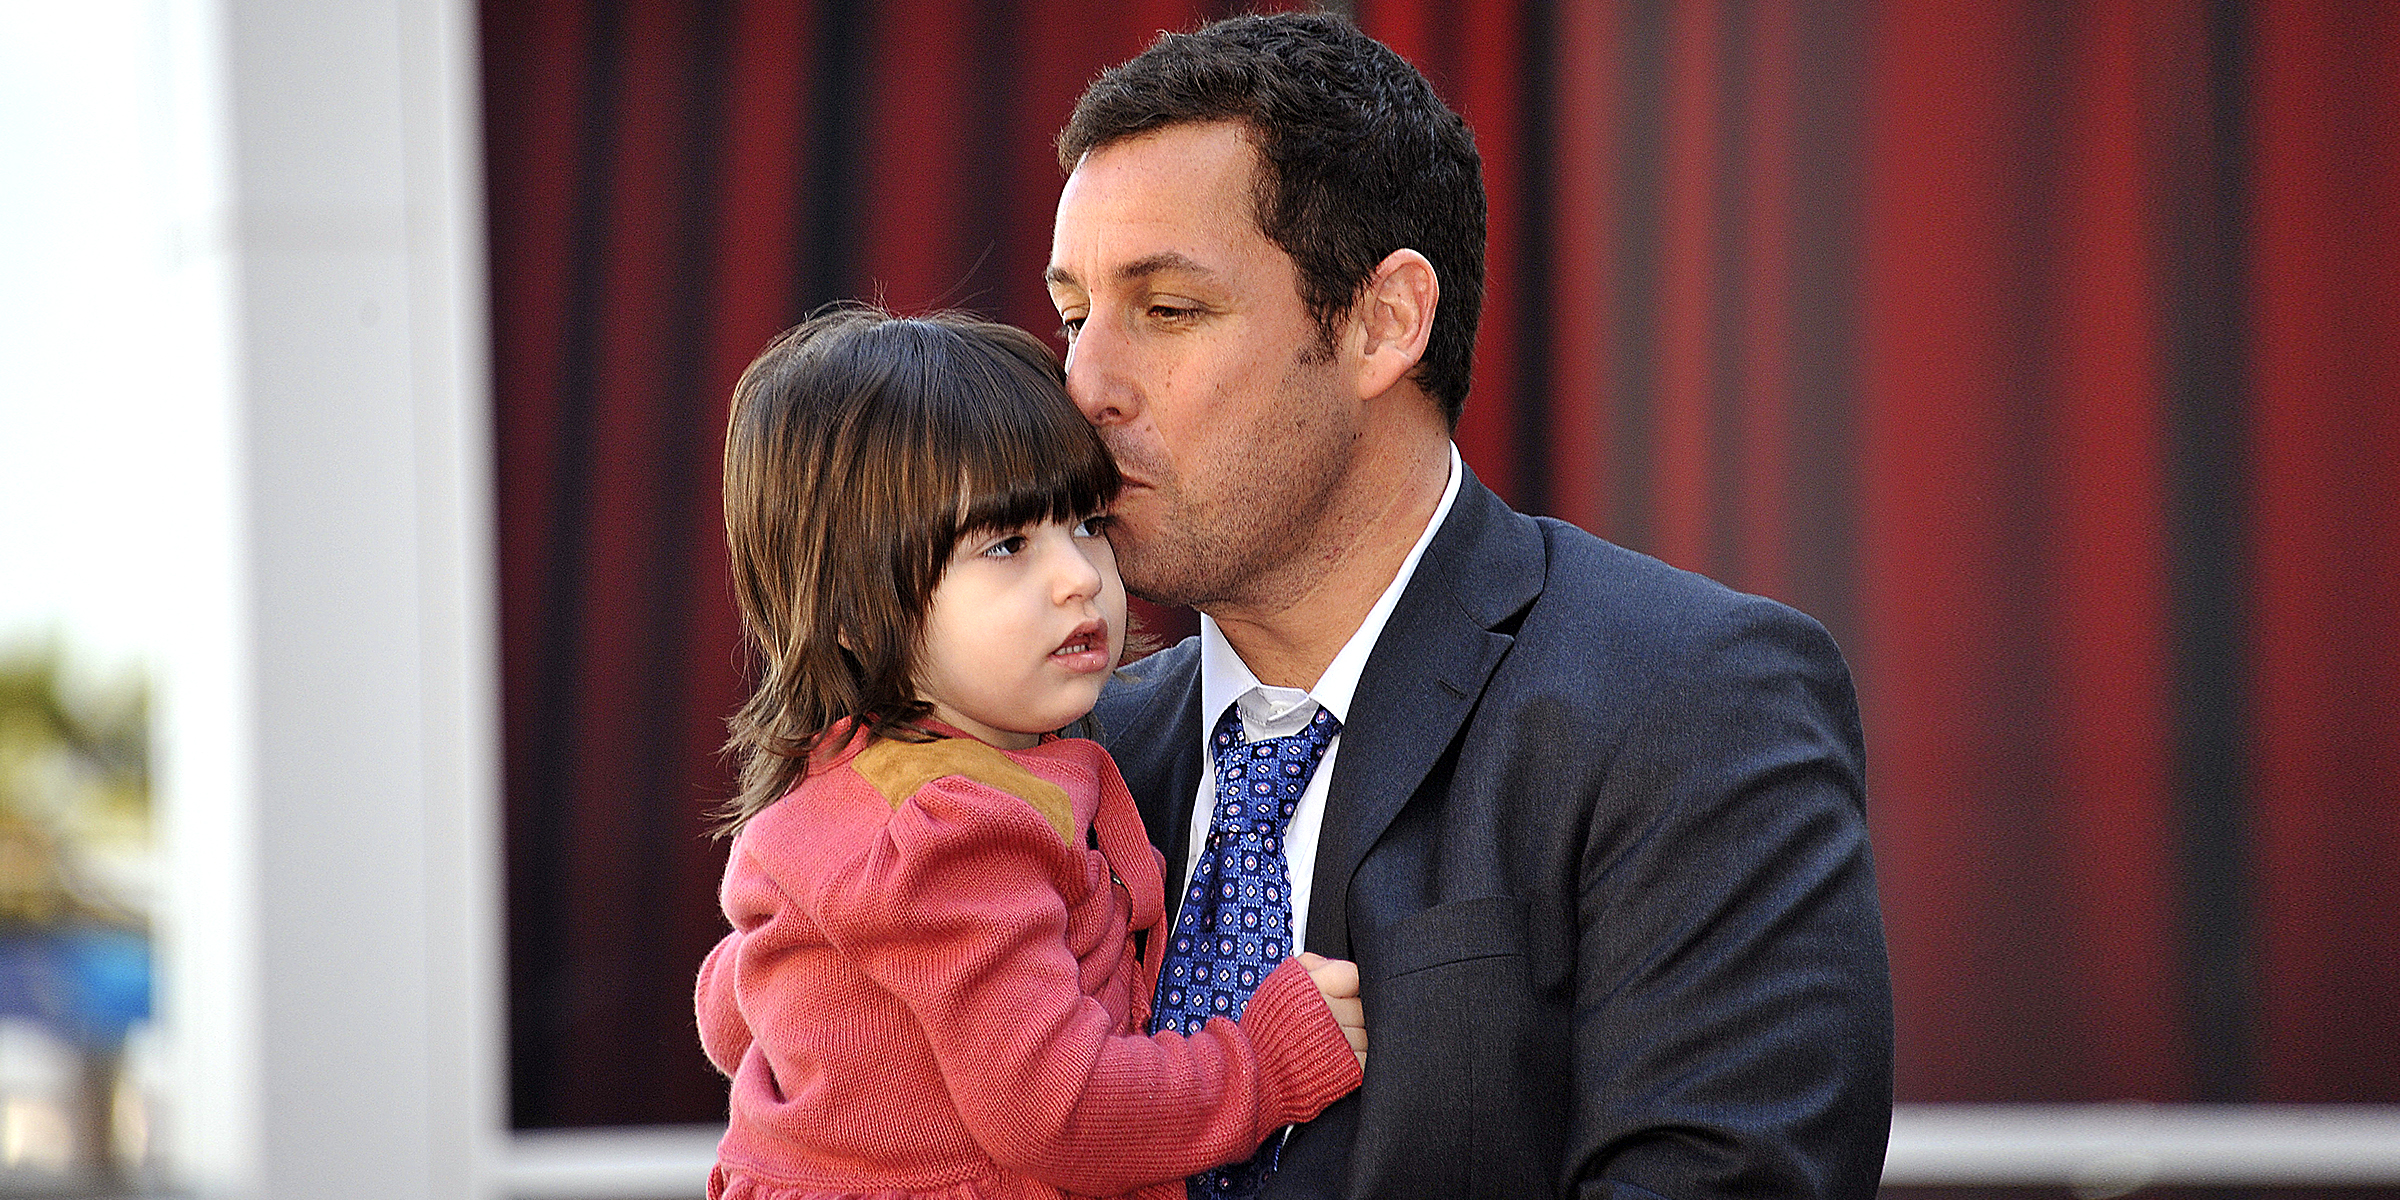 Adam Sandler and his daughter Sunny Sandler. | Source: Getty Images